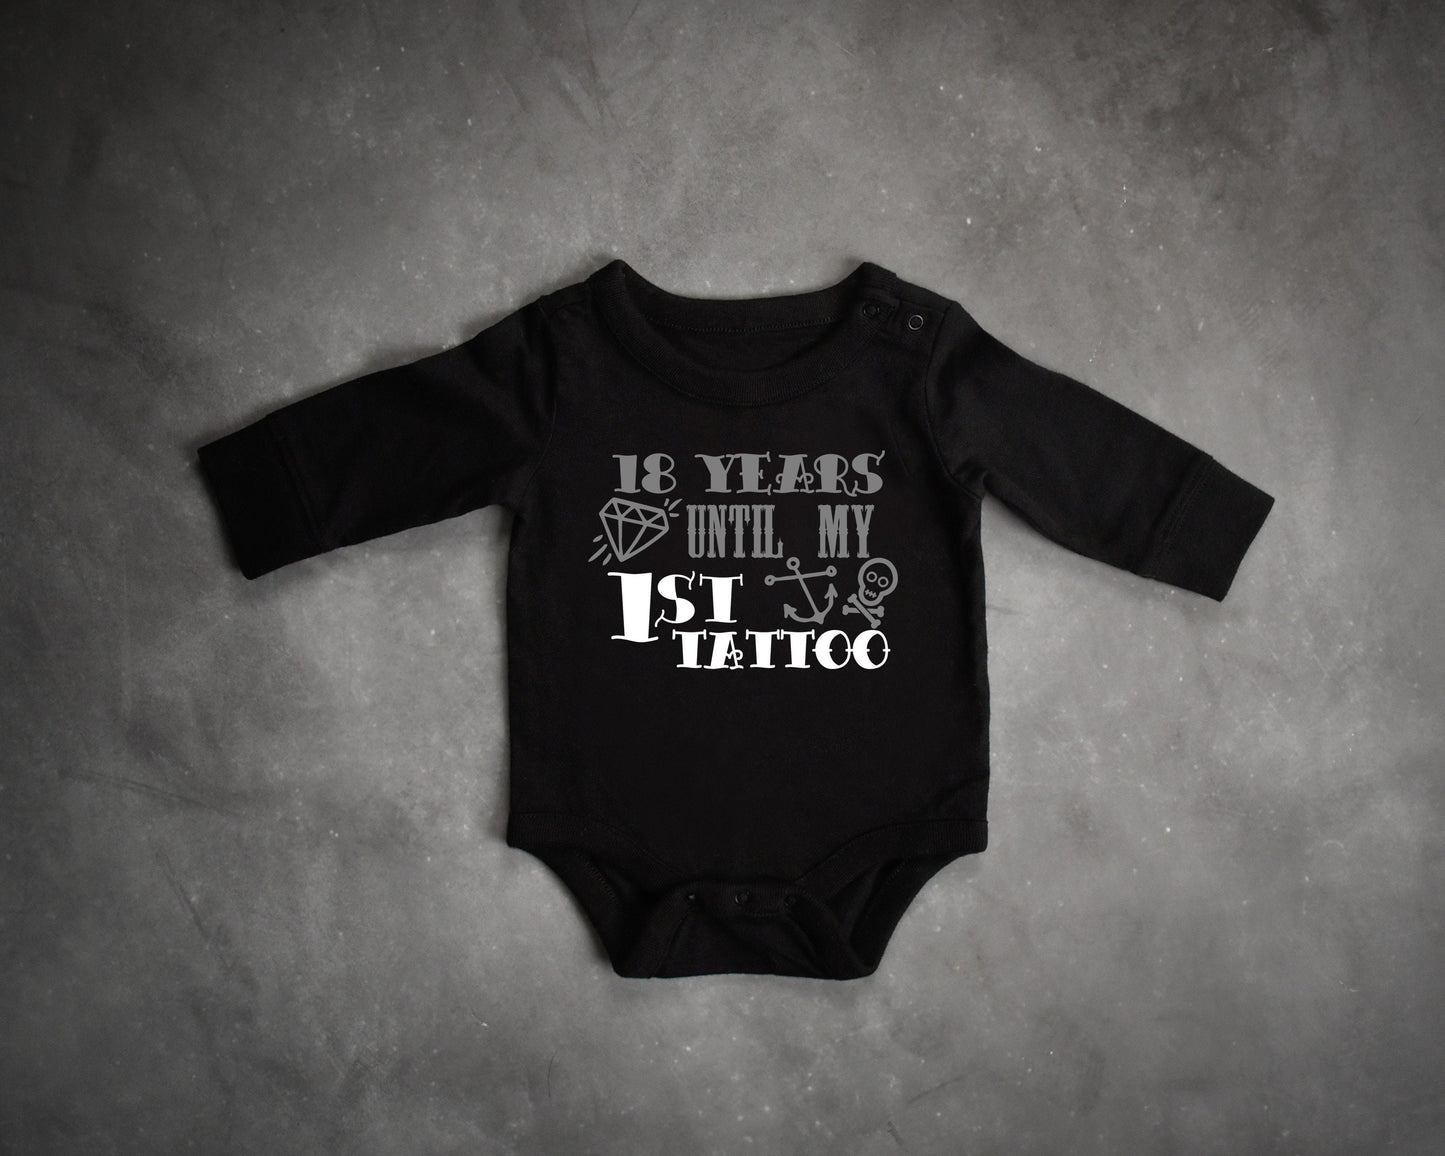 18 Years Until My 1st Tattoo Infant Bodysuit - tattoo baby bodysuit - tattooed parents - inked mom - mommy has tattoos - daddy has tattoos